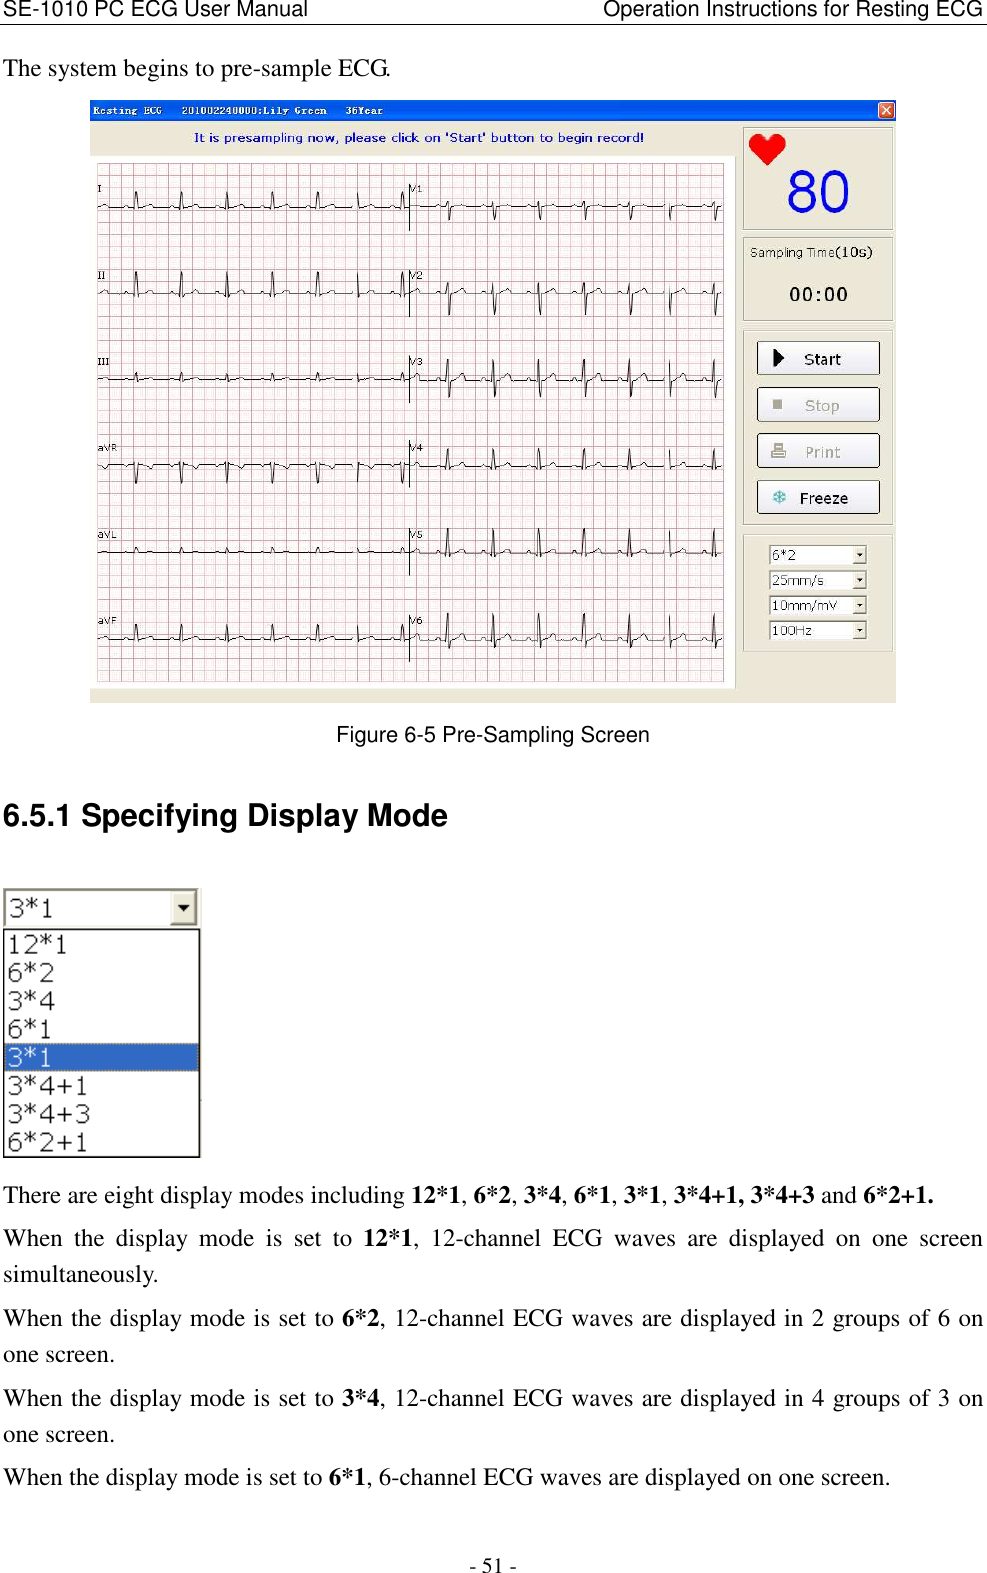 SE-1010 PC ECG User Manual                                                      Operation Instructions for Resting ECG - 51 - The system begins to pre-sample ECG.  Figure 6-5 Pre-Sampling Screen 6.5.1 Specifying Display Mode  There are eight display modes including 12*1, 6*2, 3*4, 6*1, 3*1, 3*4+1, 3*4+3 and 6*2+1. When  the  display  mode  is  set  to  12*1,  12-channel  ECG  waves  are  displayed  on  one  screen simultaneously. When the display mode is set to 6*2, 12-channel ECG waves are displayed in 2 groups of 6 on one screen. When the display mode is set to 3*4, 12-channel ECG waves are displayed in 4 groups of 3 on one screen. When the display mode is set to 6*1, 6-channel ECG waves are displayed on one screen. 